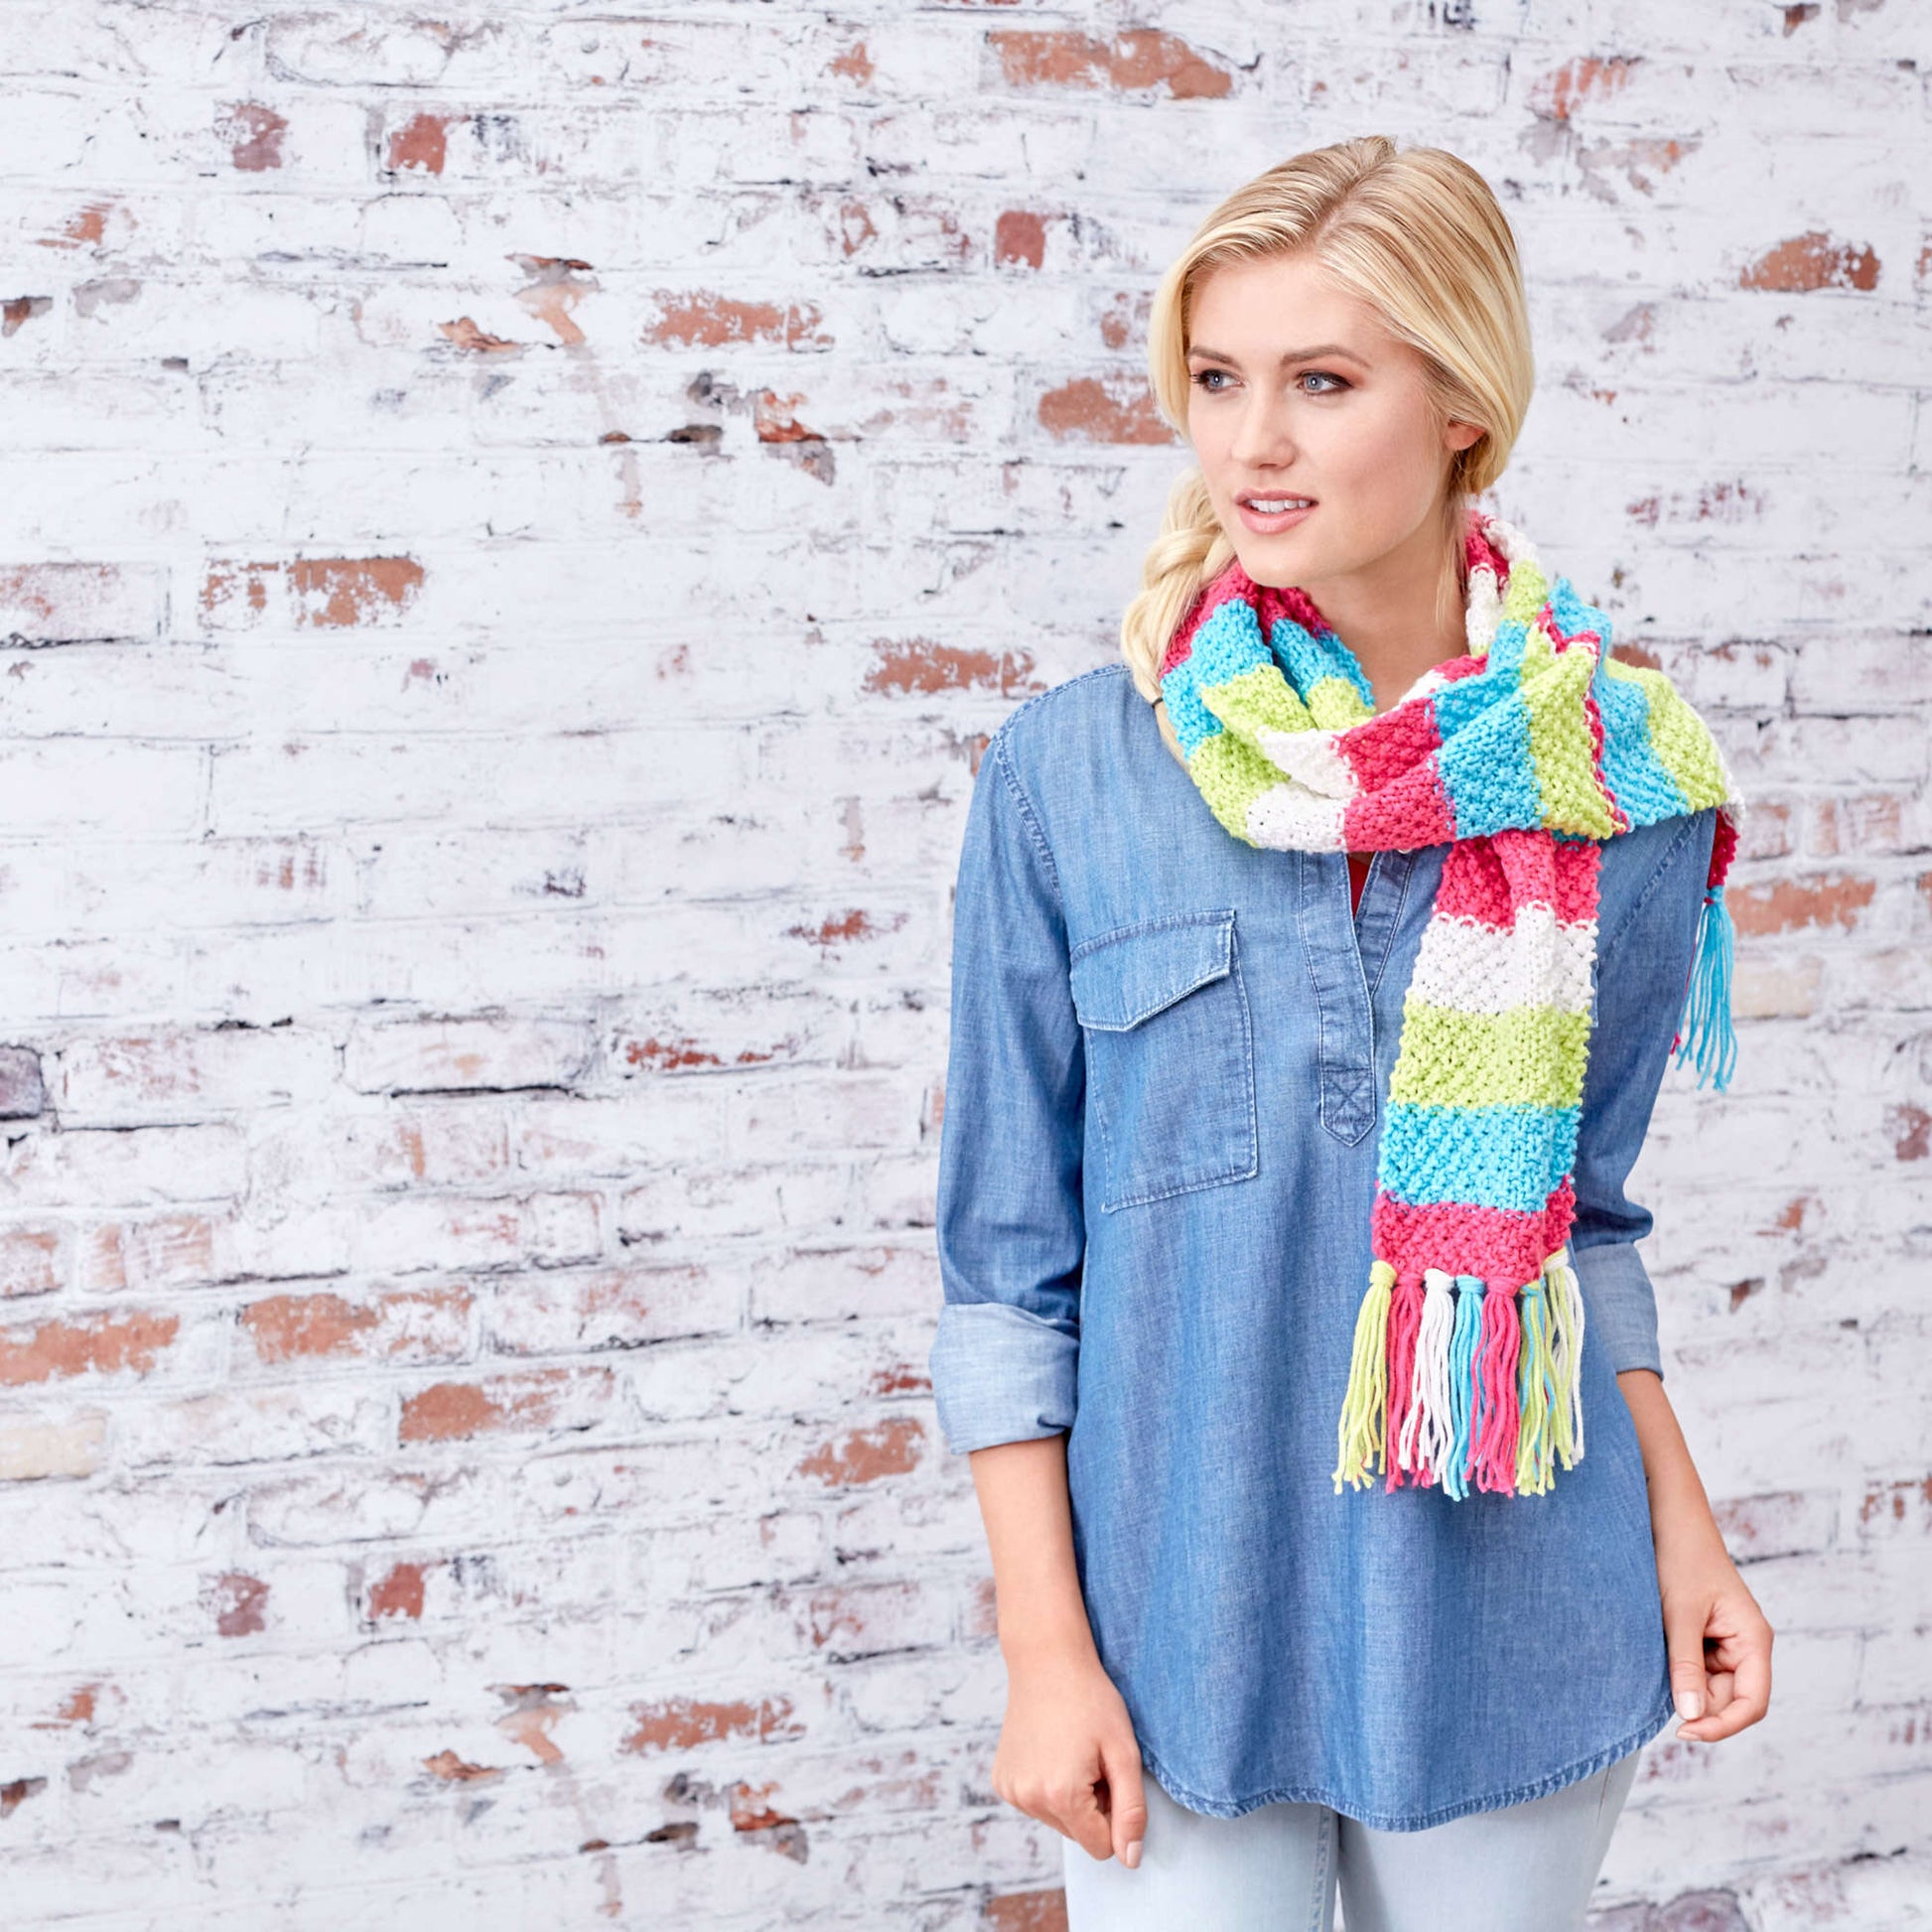 Free Red Heart Knit Bright Stripes Textured Scarf Pattern